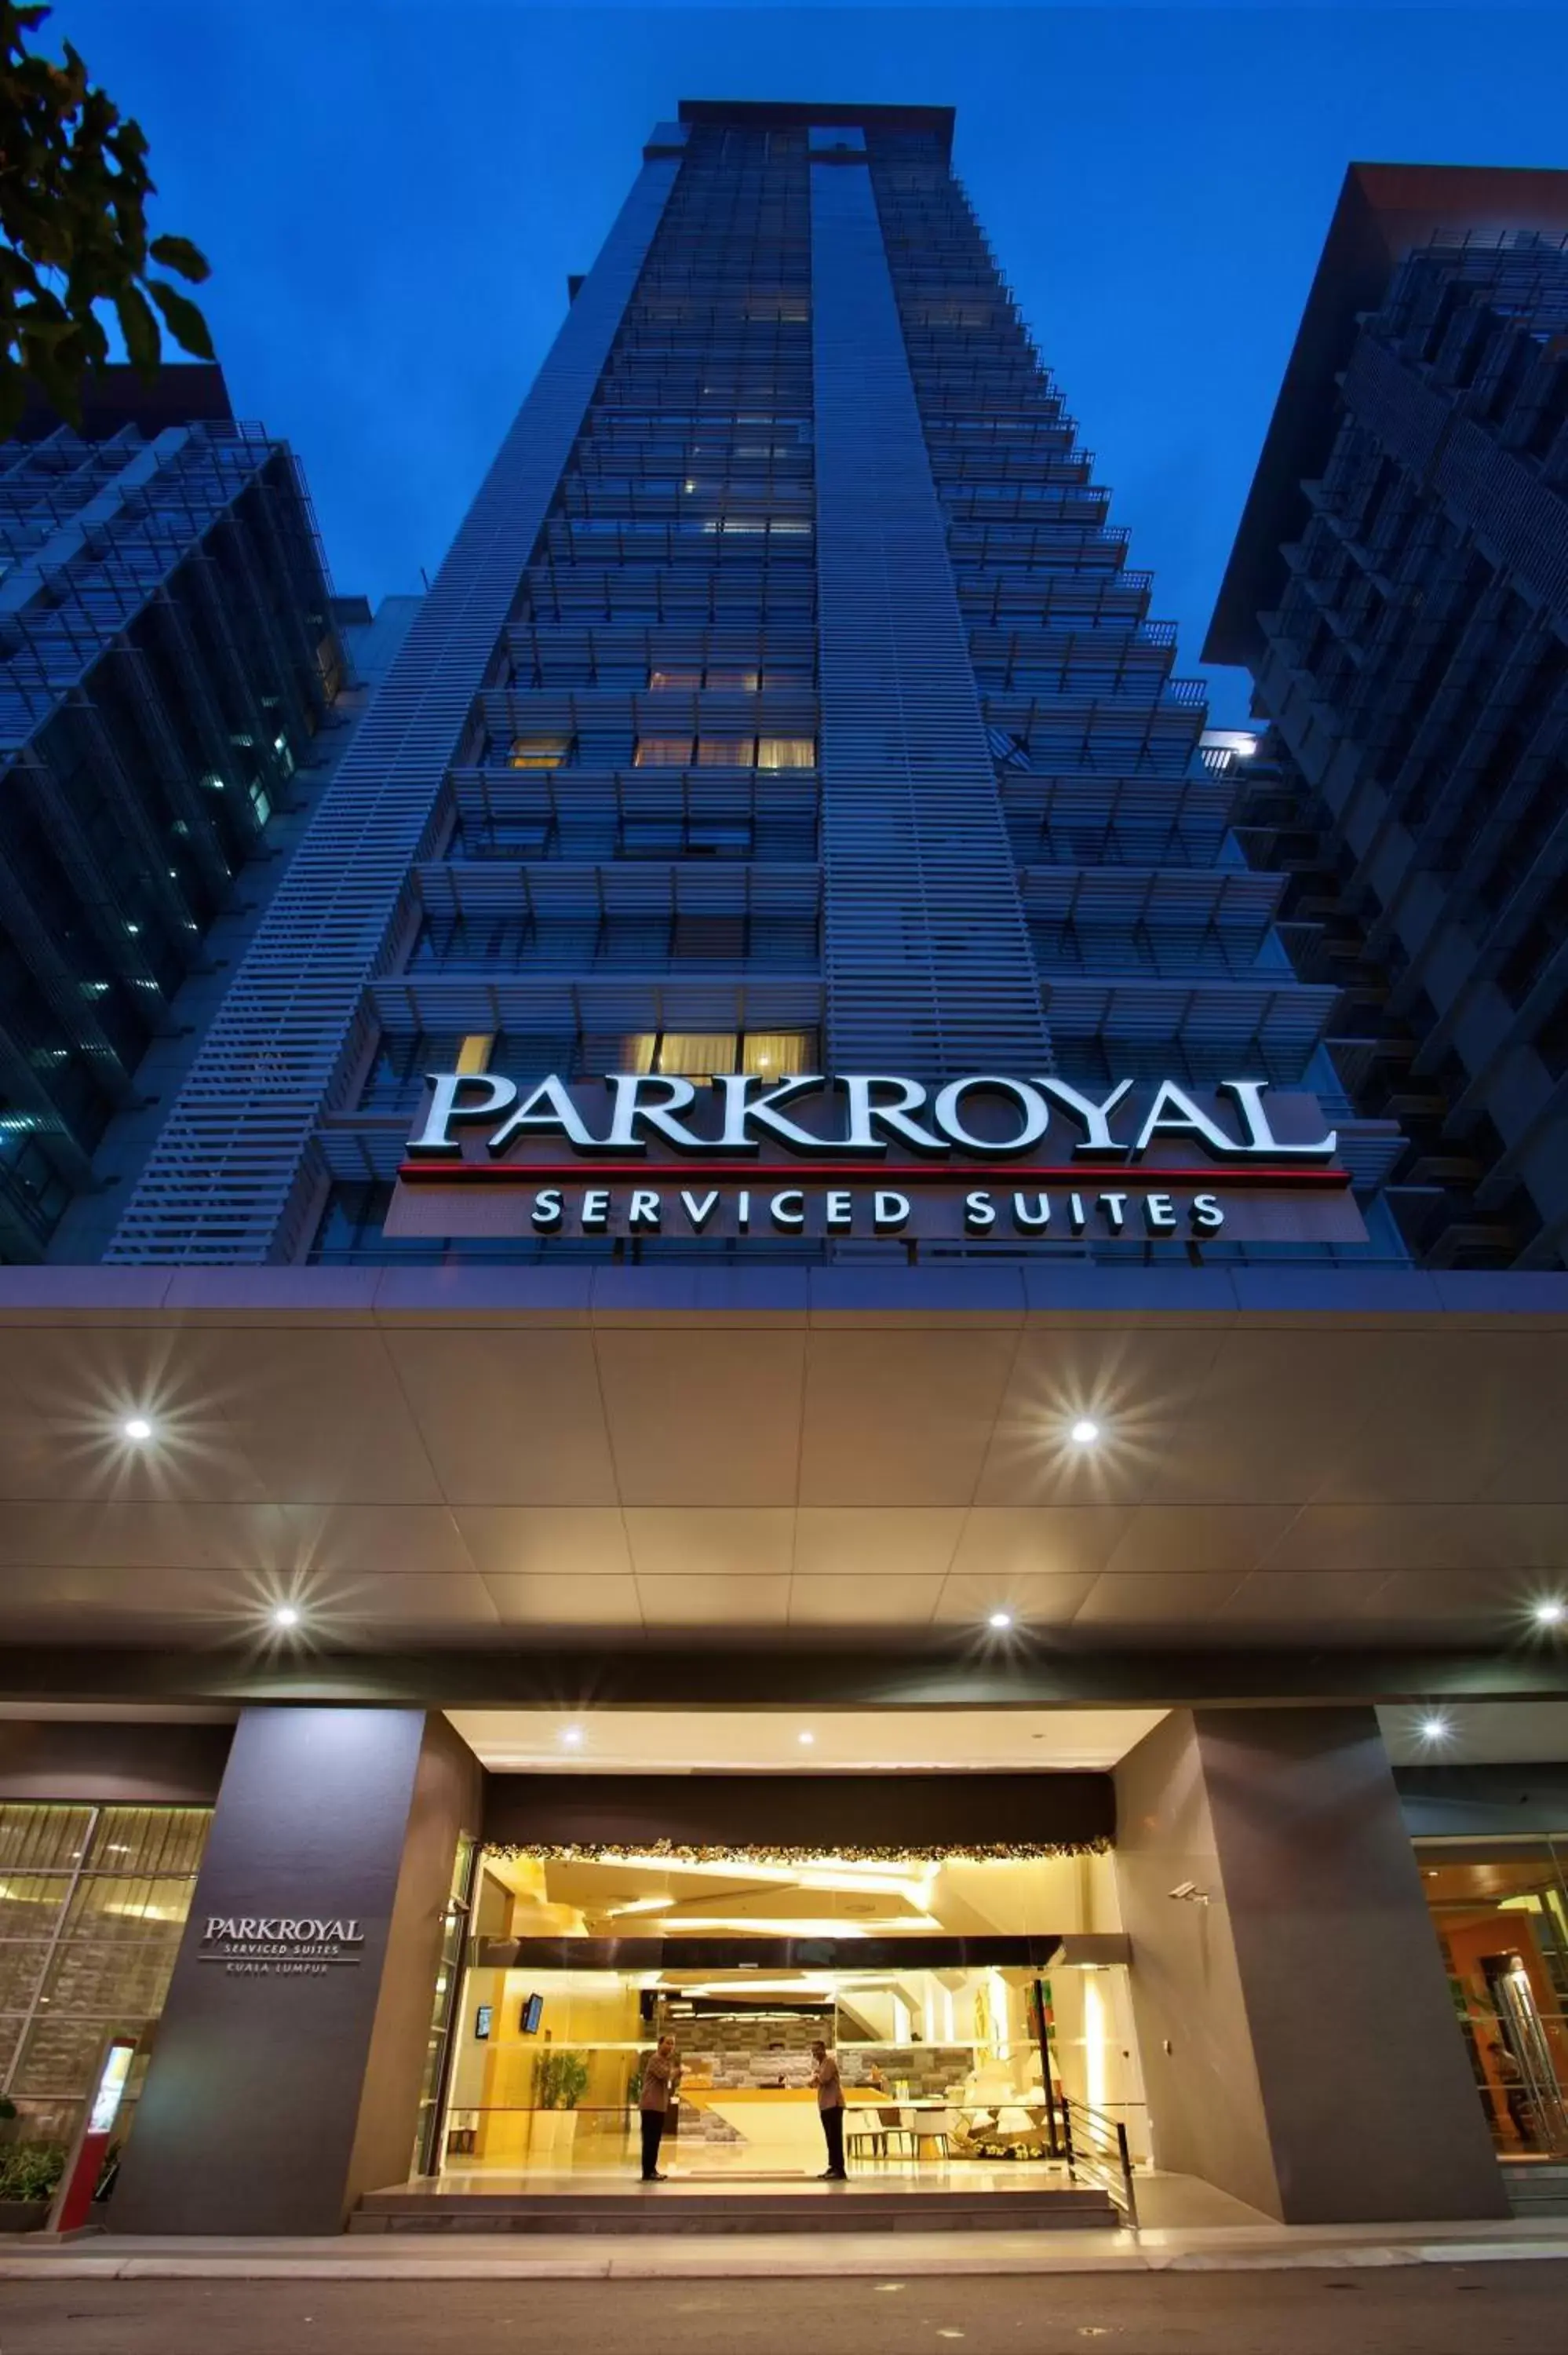 Property Building in PARKROYAL Serviced Suites Kuala Lumpur